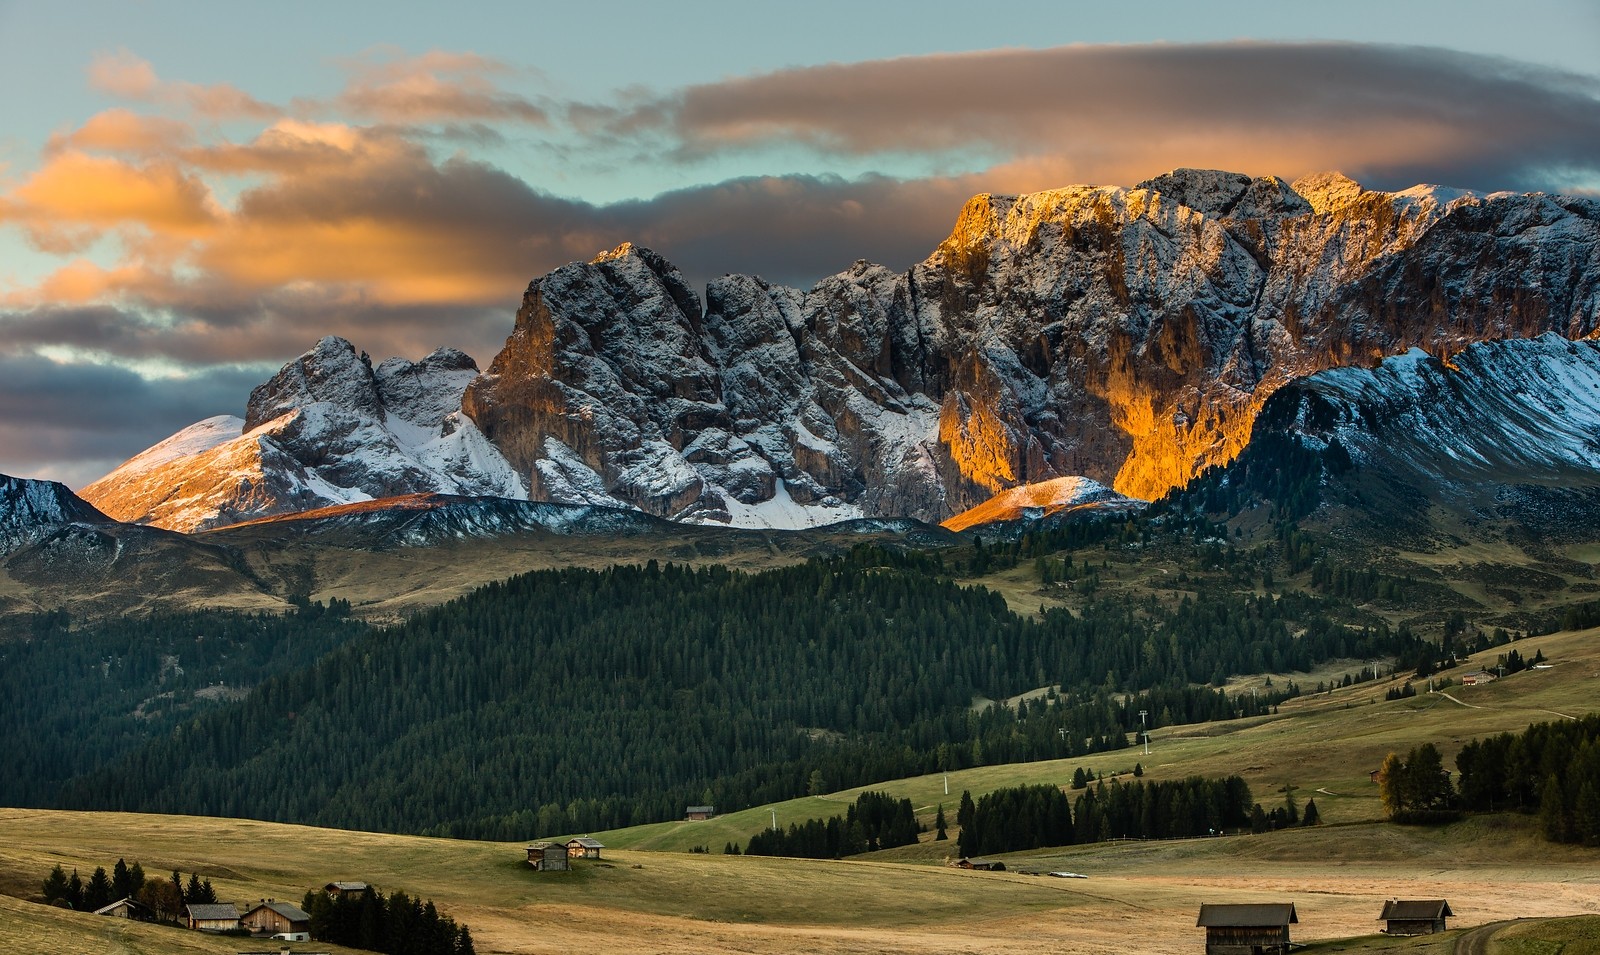 General 1600x955 sunset mountains forest Dolomites snowy peak clouds grass cabin Alps nature landscape